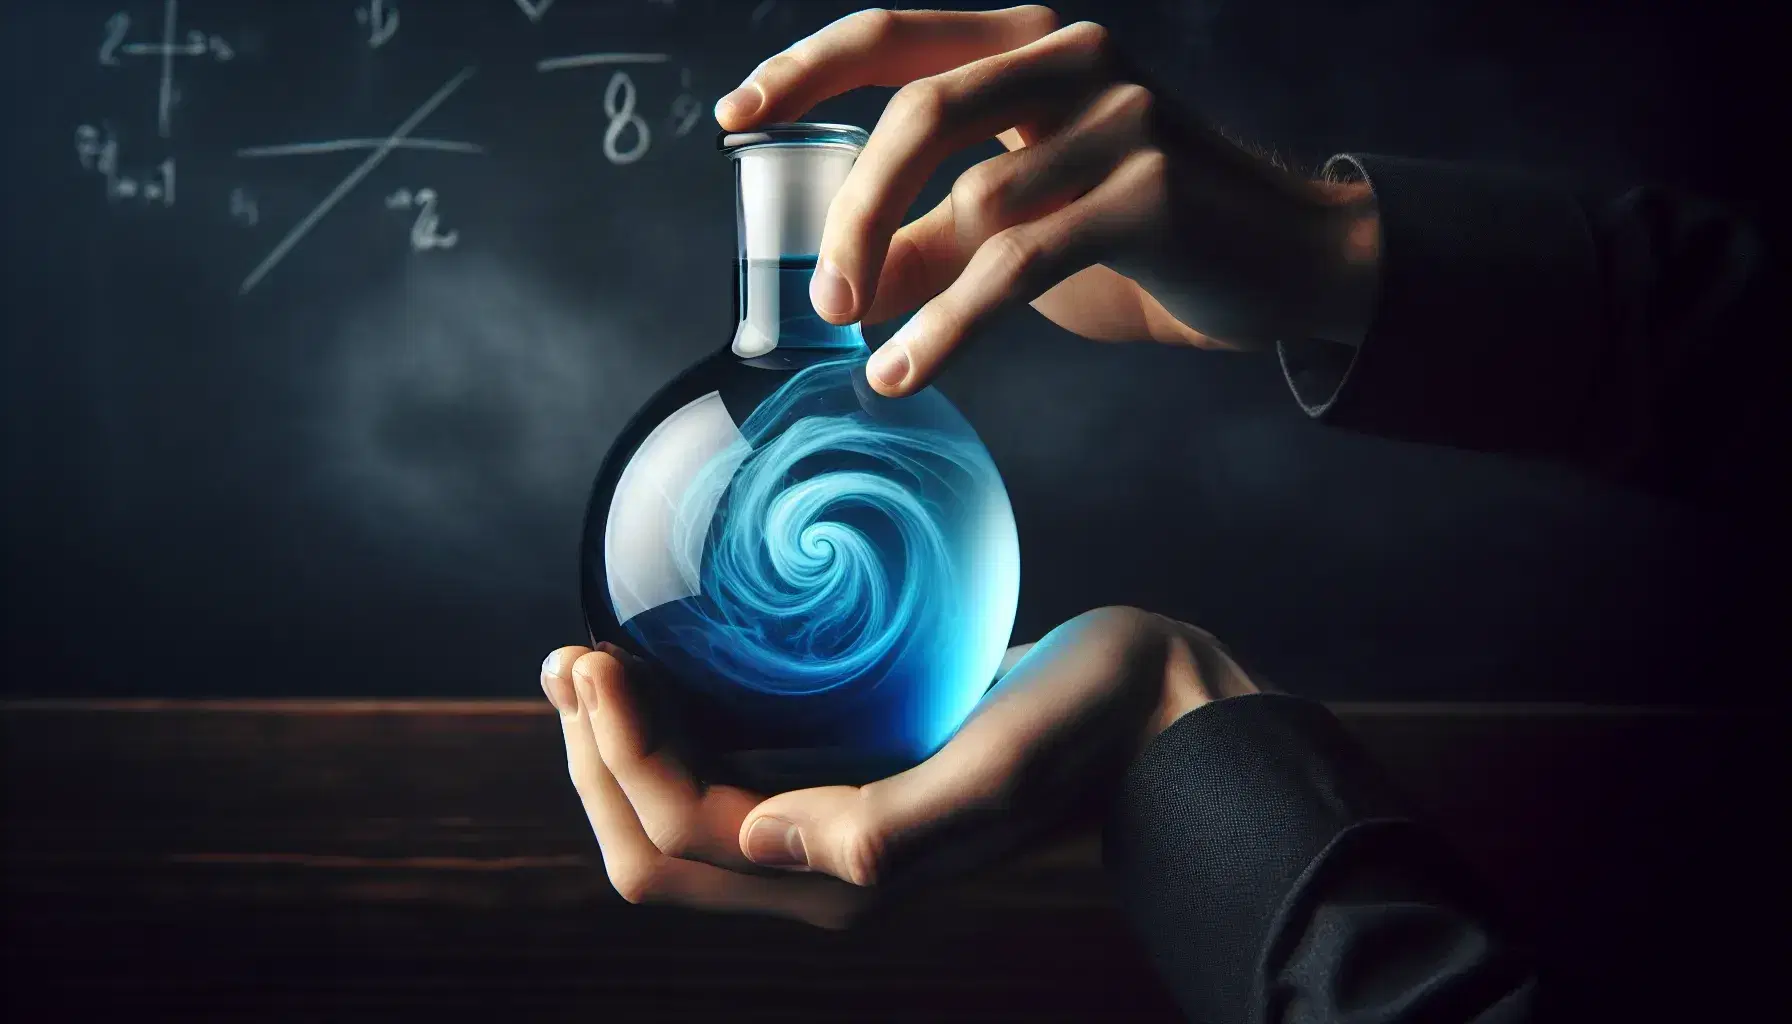 Hands holding a glass flask with a blue gradient liquid against a chalkboard background, highlighting the swirling motion and color contrast.